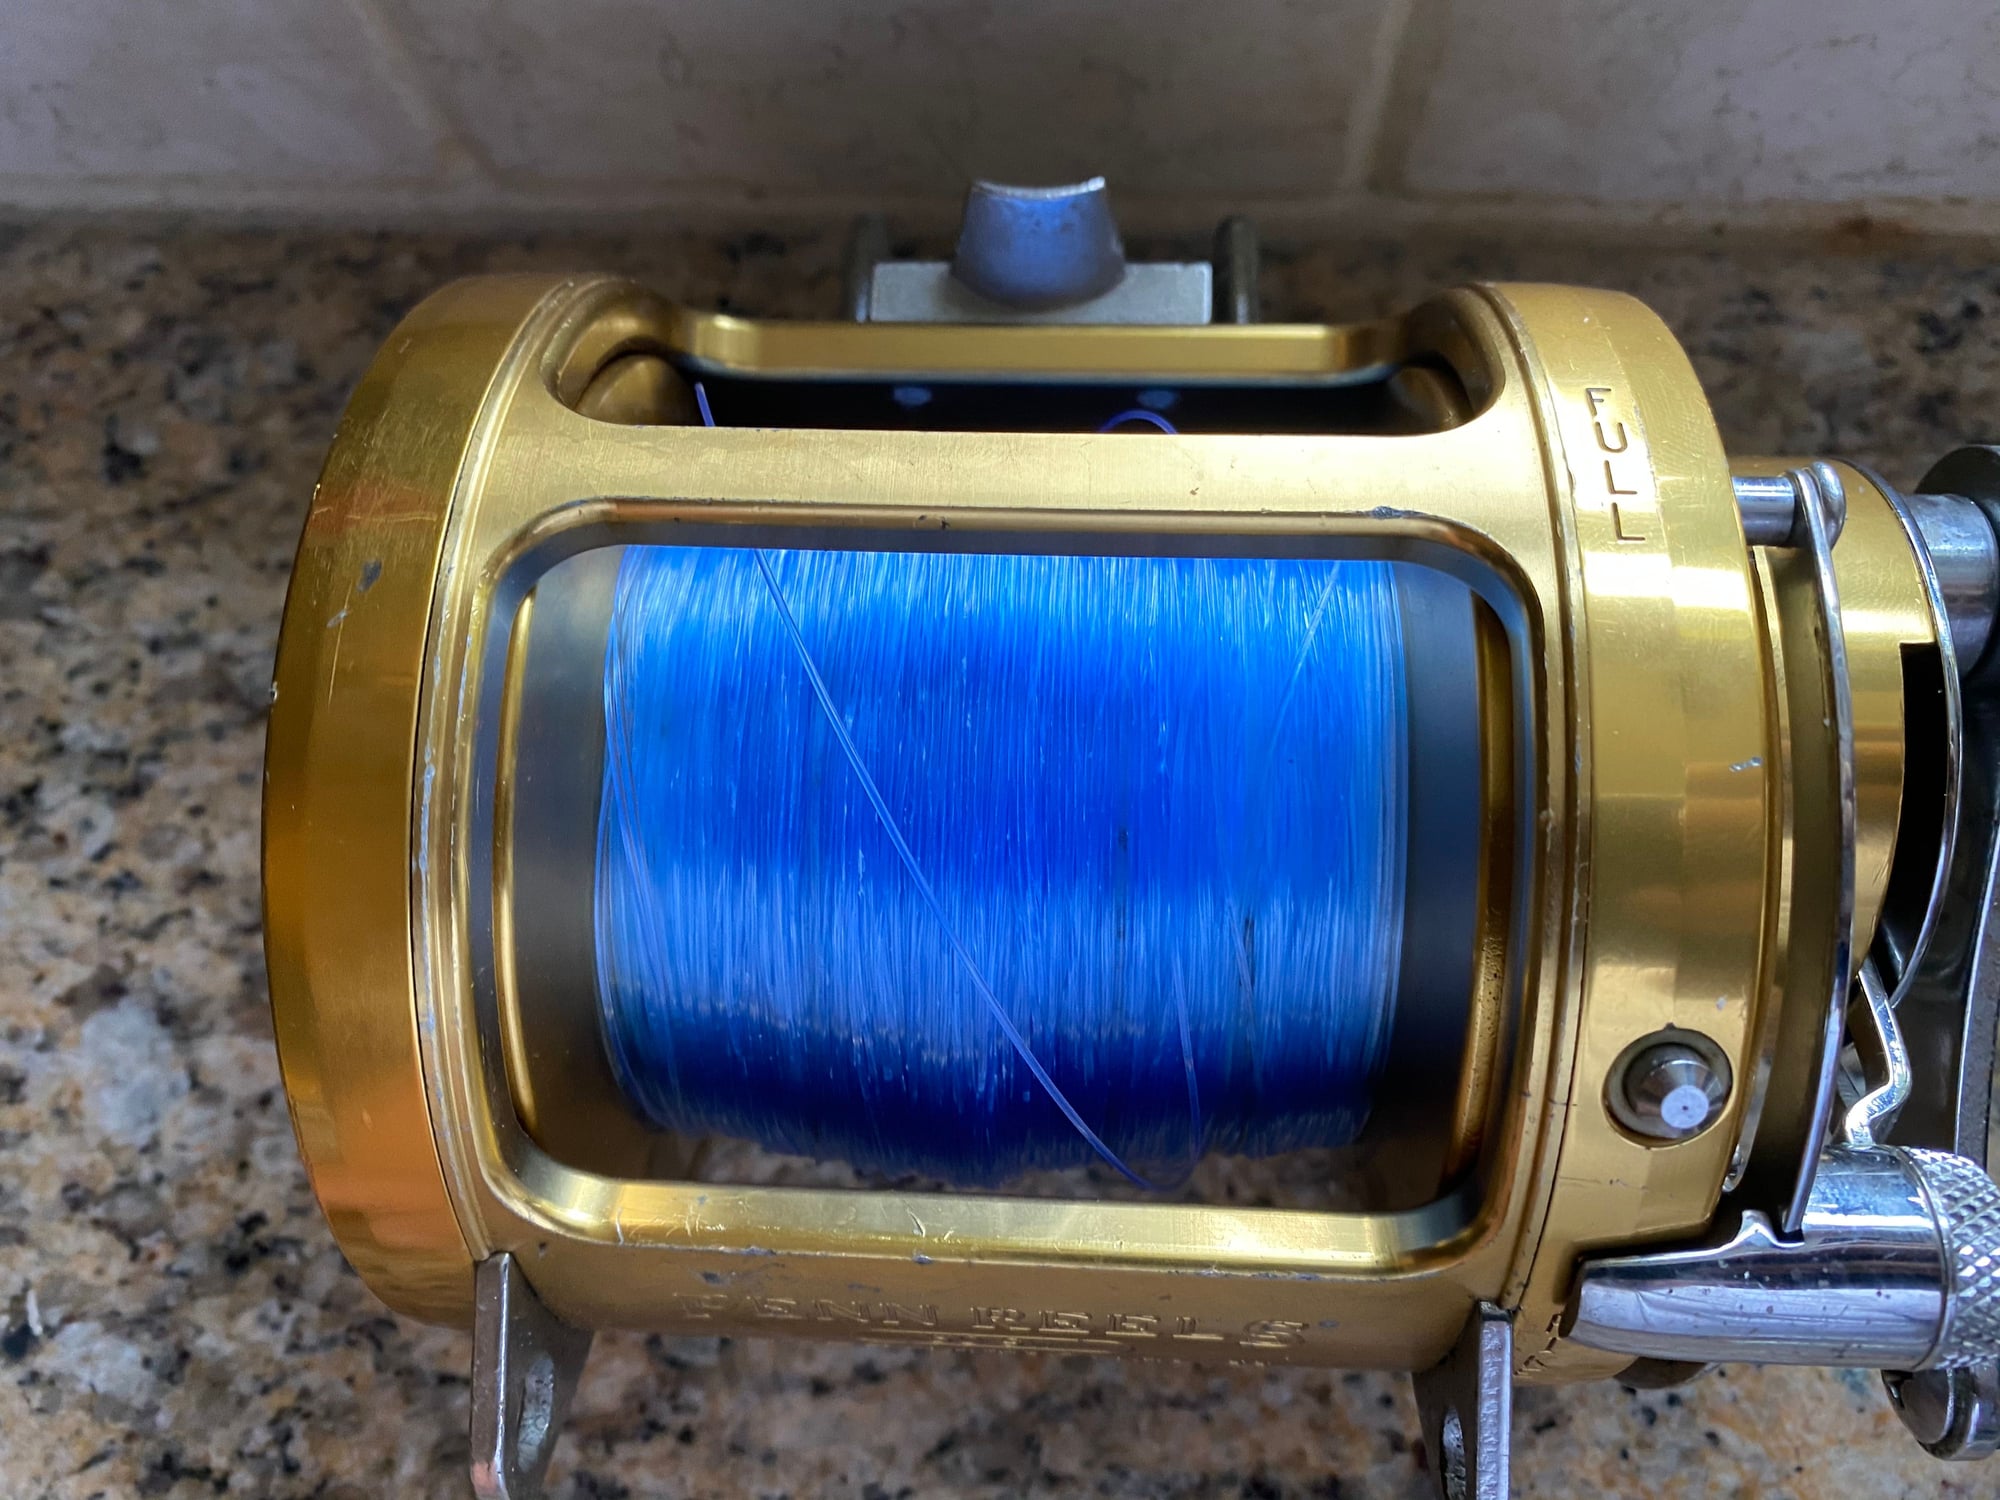 Reels For Sale Penn 50sw 30tw and 2 Calcutta 700s - The Hull Truth